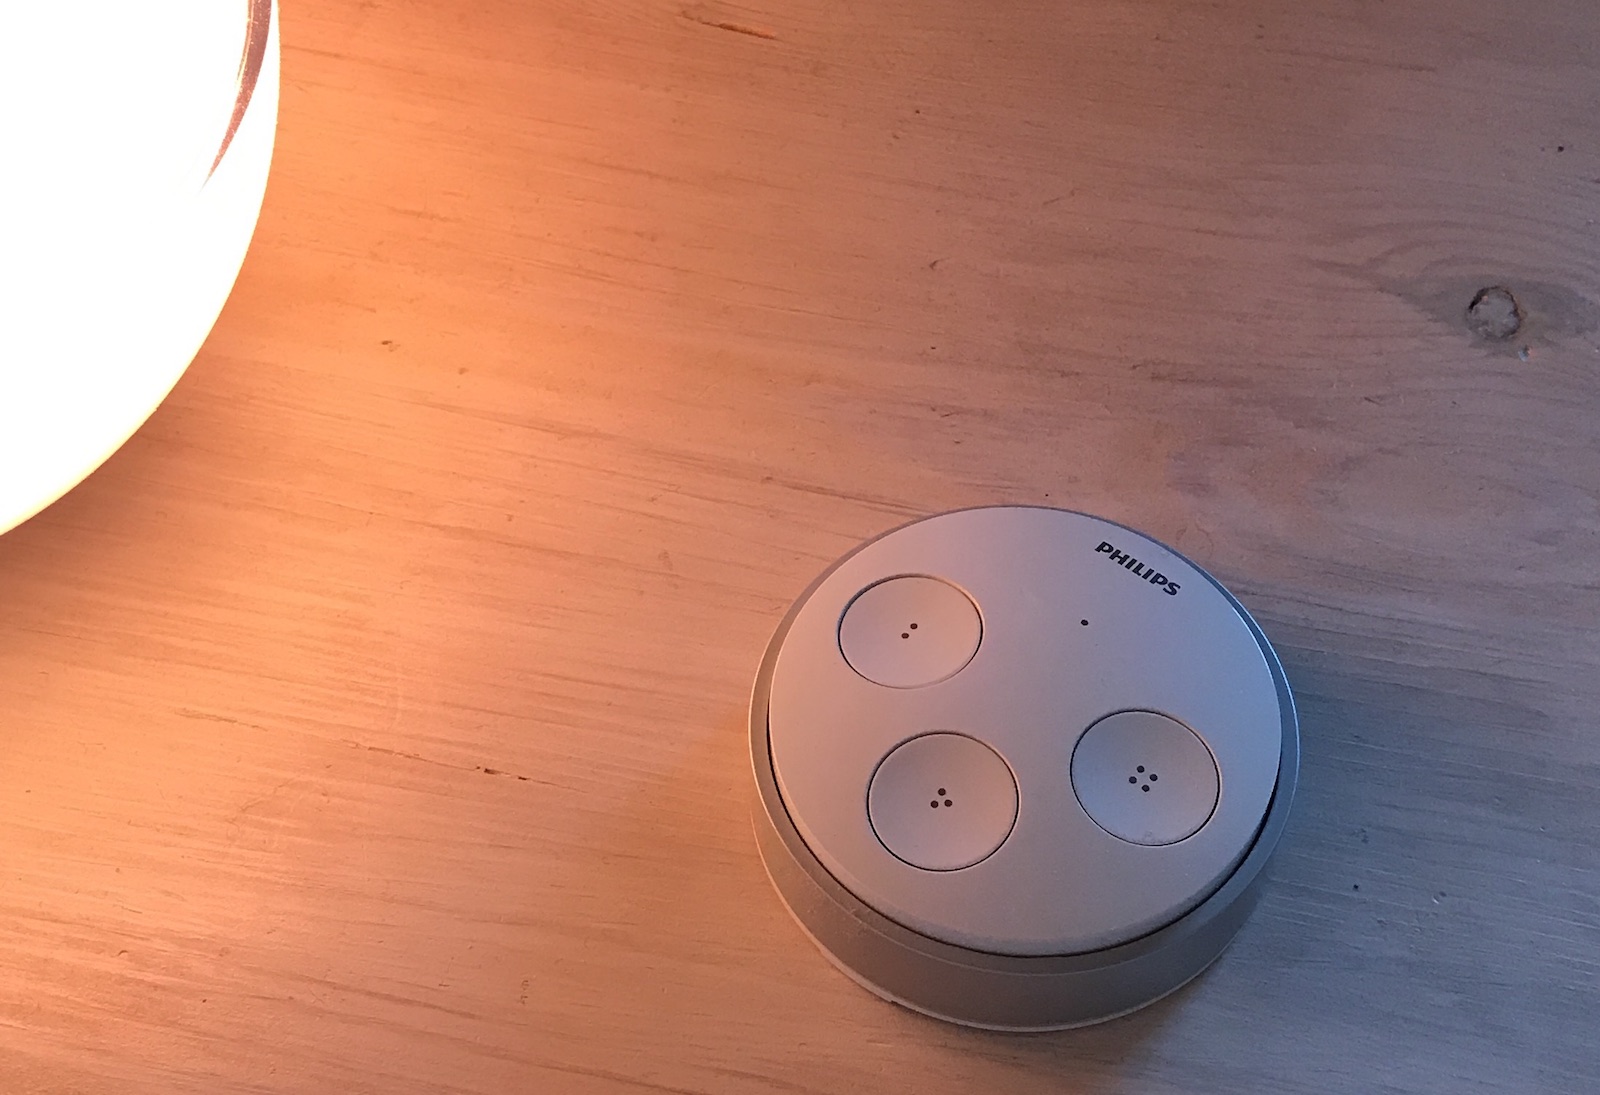 Hue tap, wireless four-button light switch